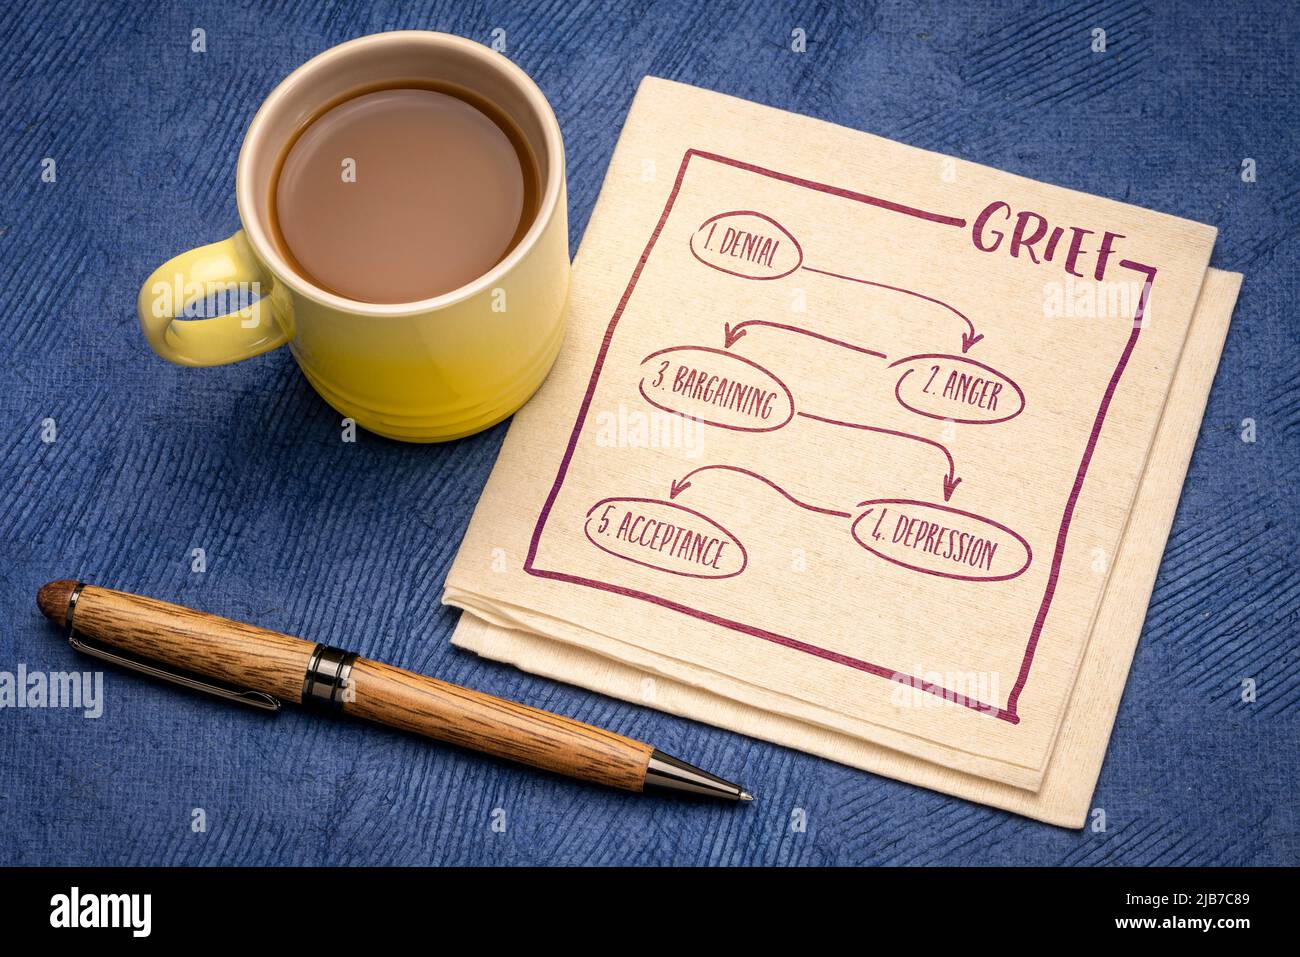 five stages of grief - denial, anger, bargaining, depression, acceptance, handwriting and  sketch on a napkin with a cup ofcoffee Stock Photo